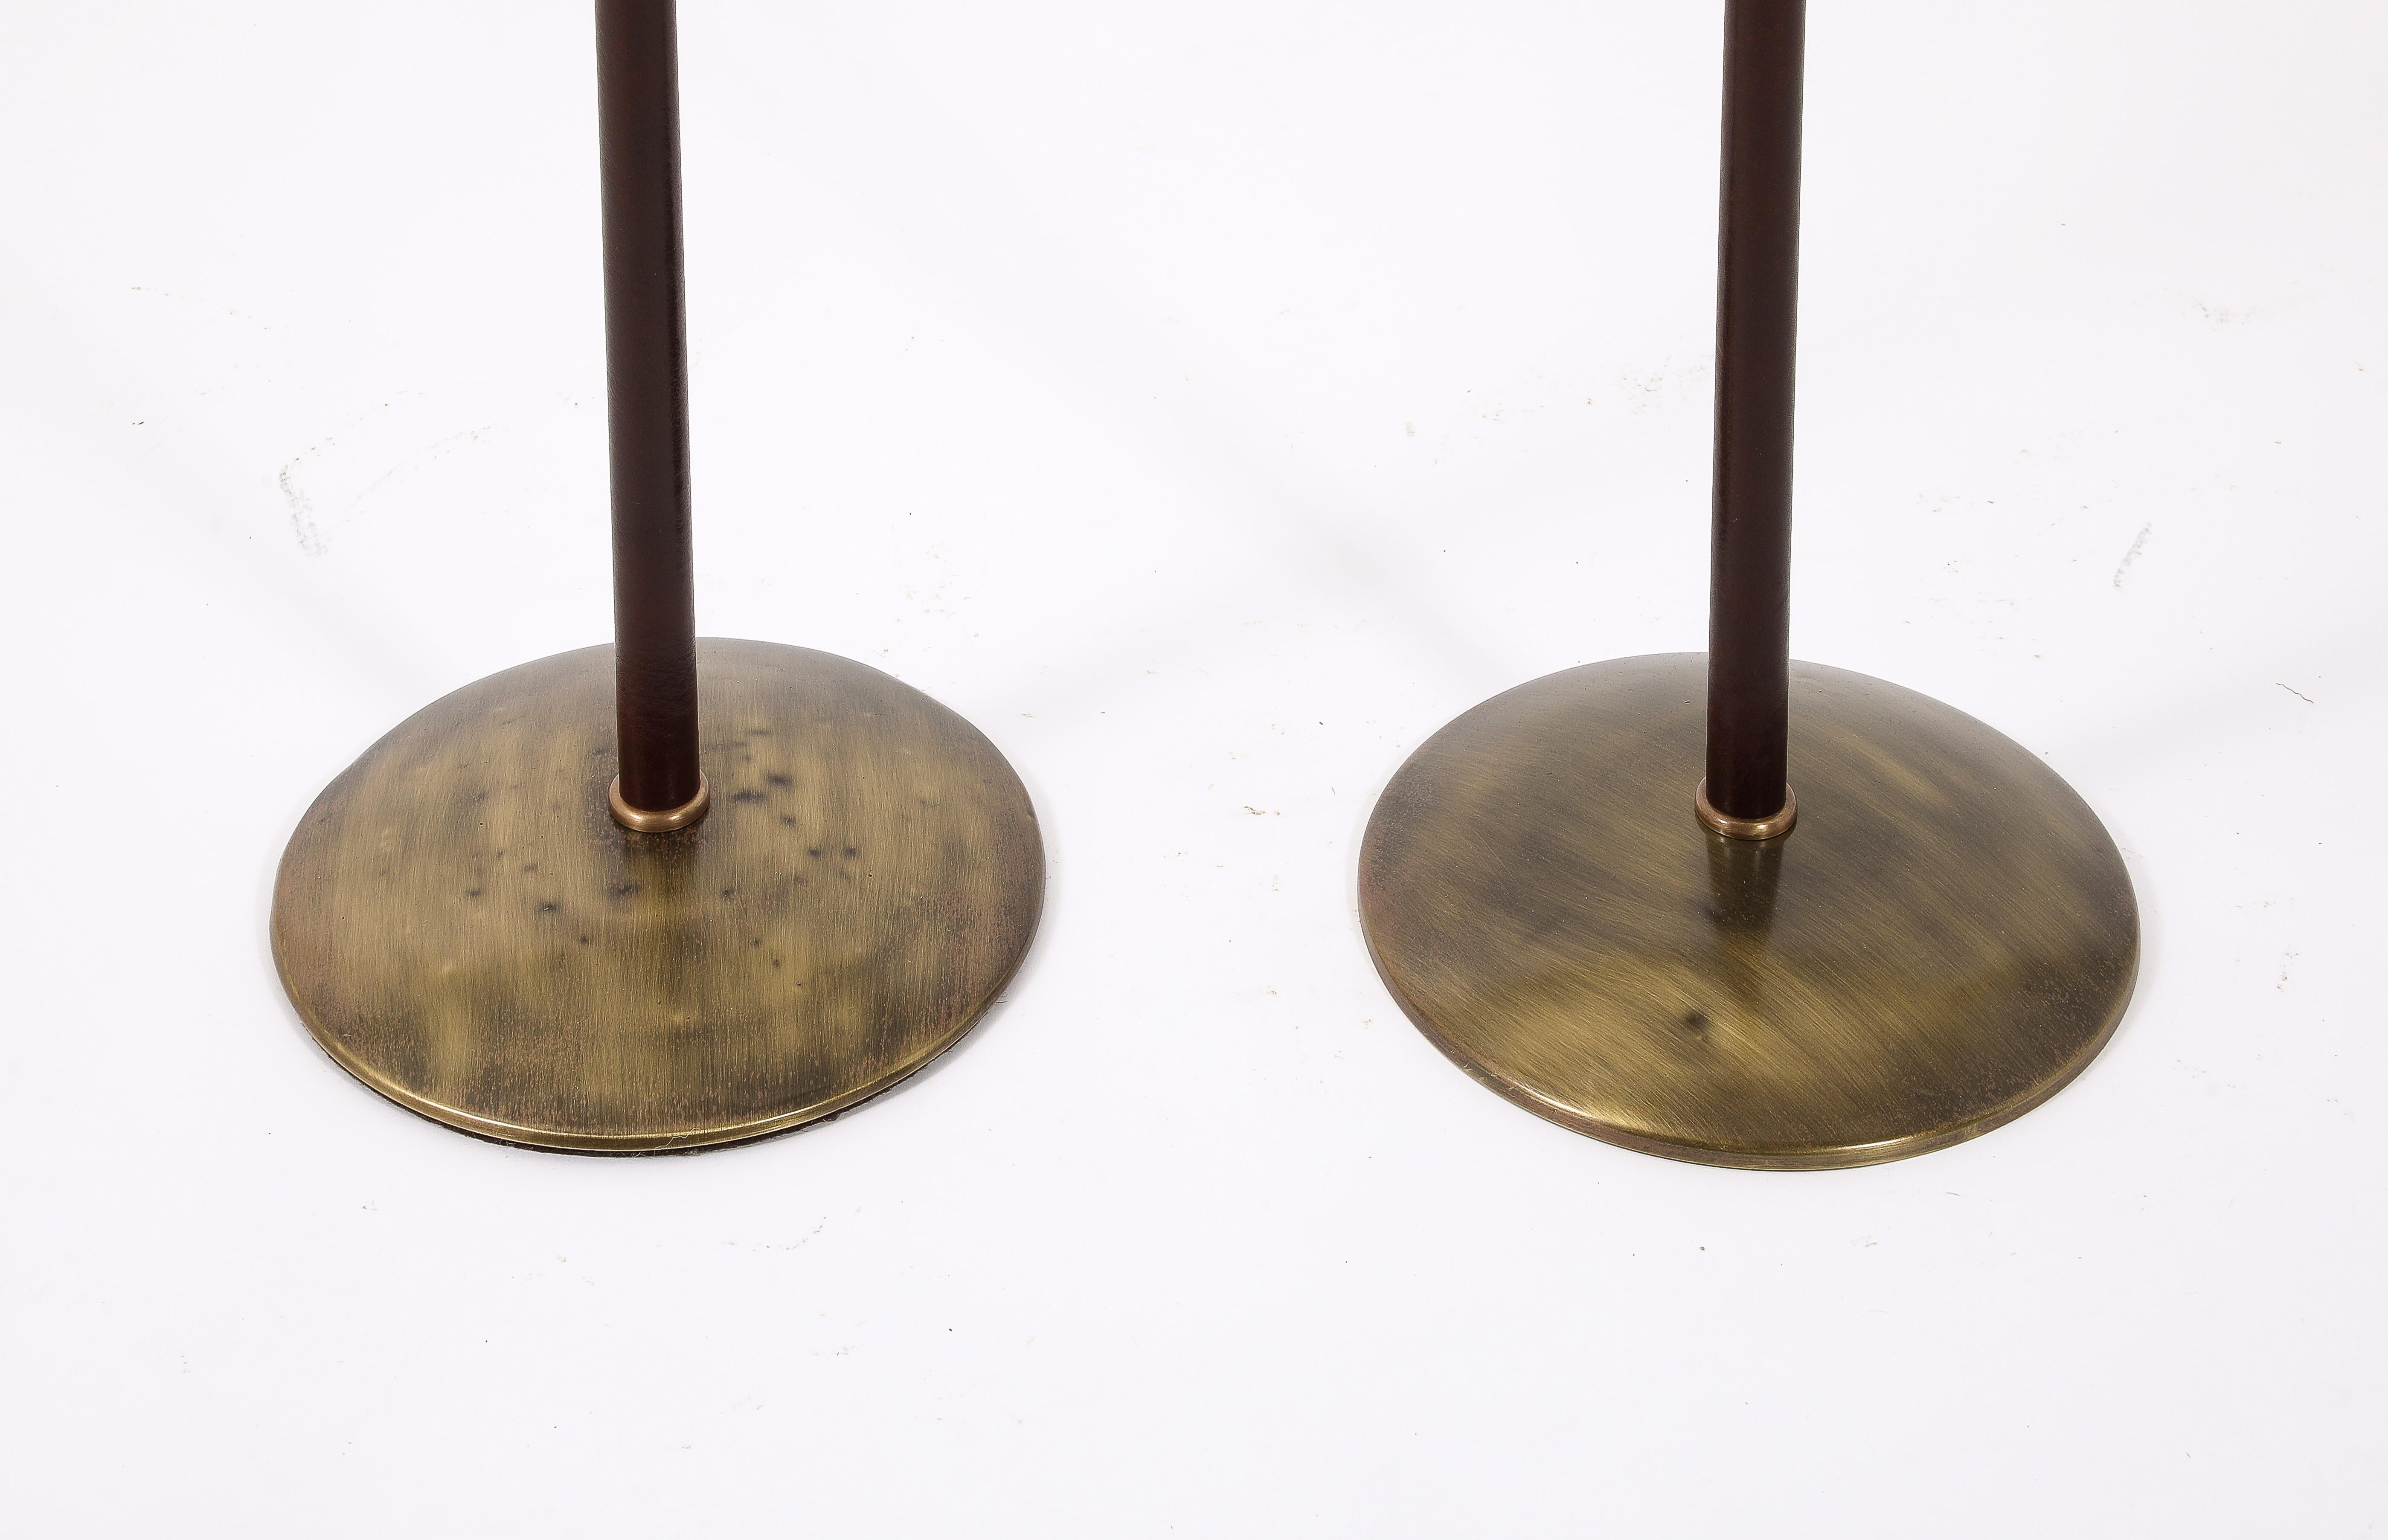 MetalArte Brass & Stitched Brown Leather Floor Lamps, Spain 1960's For Sale 4